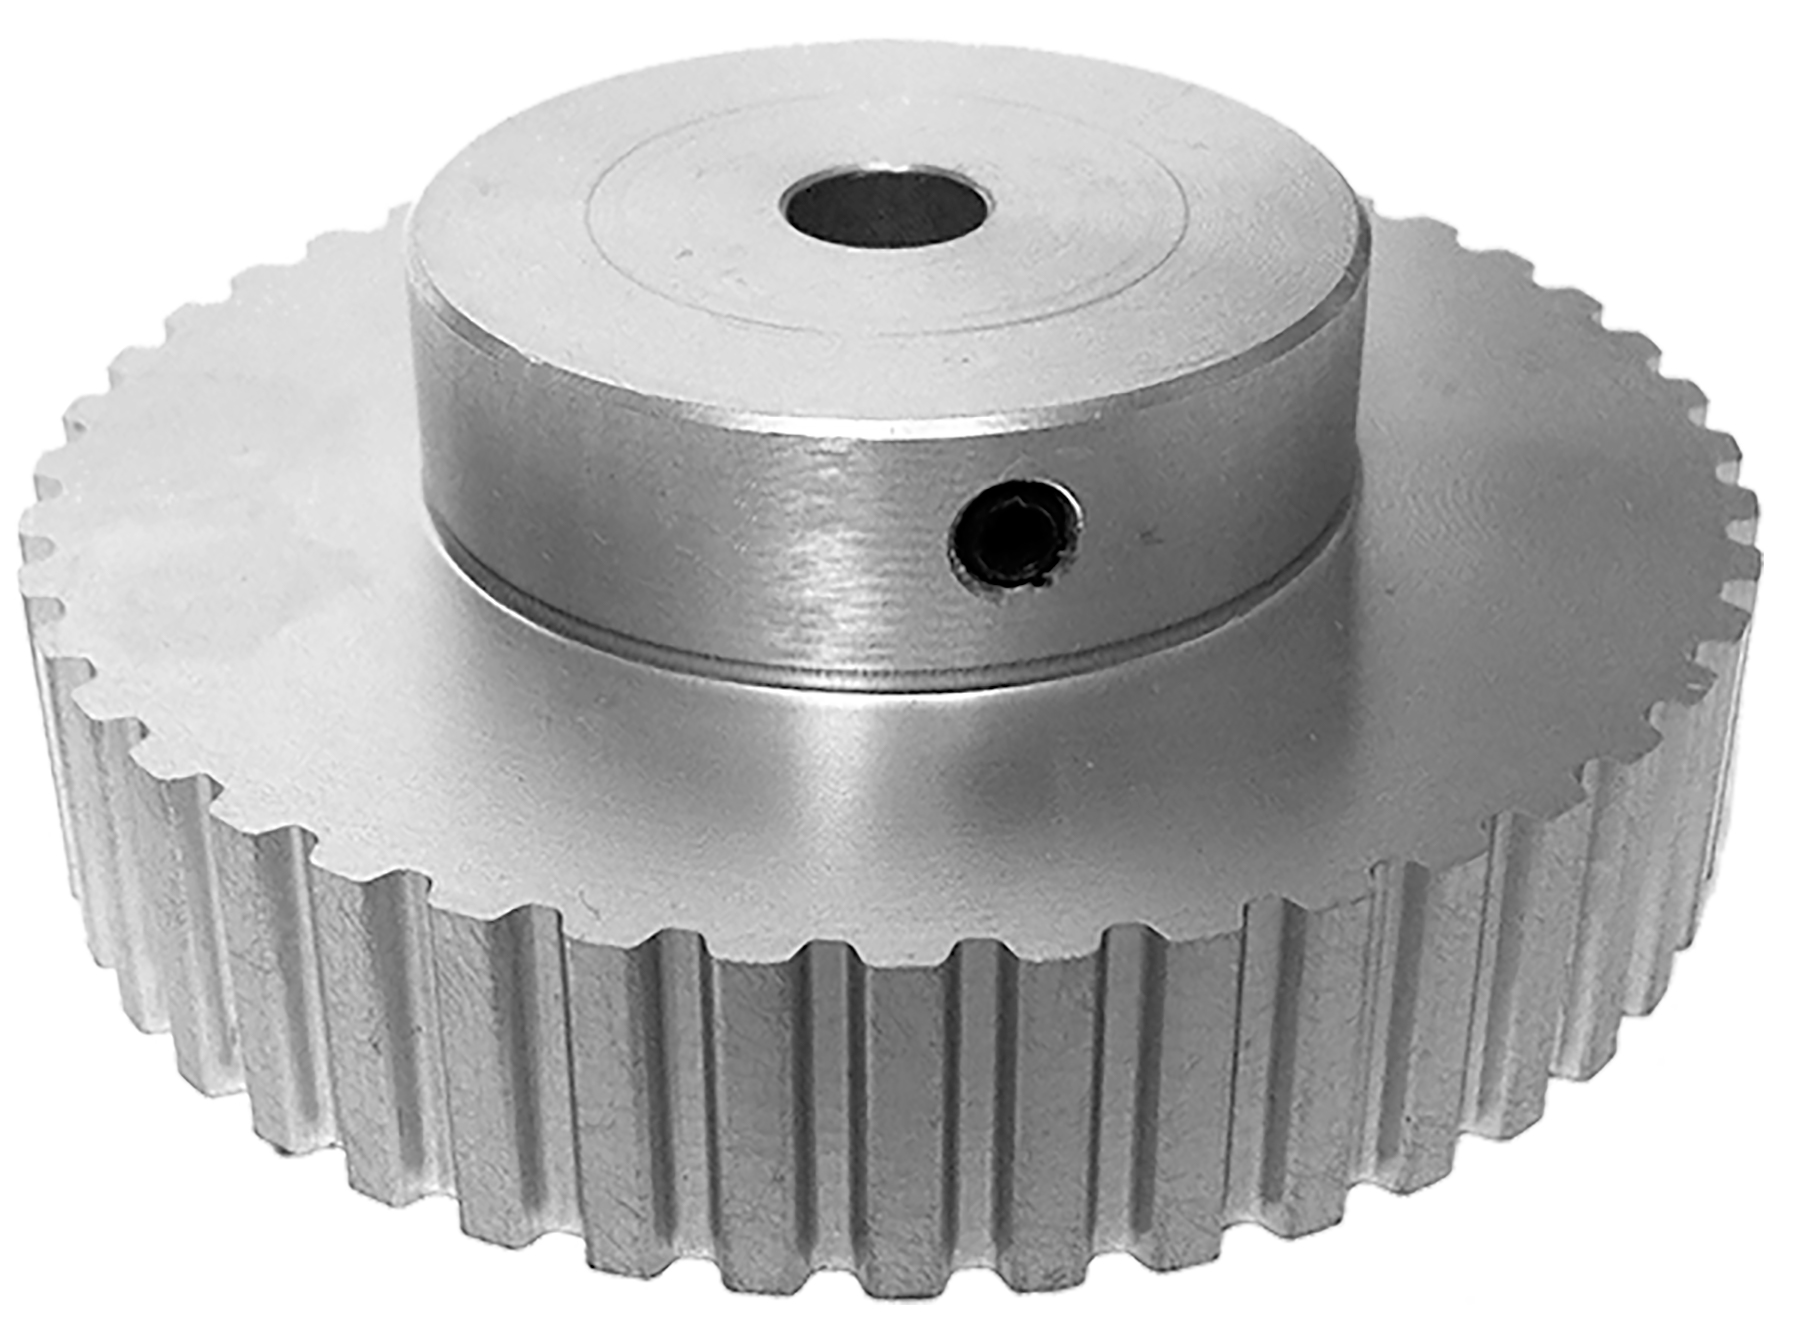 10XL037-6A2 - Aluminum Imperial Pitch Pulleys